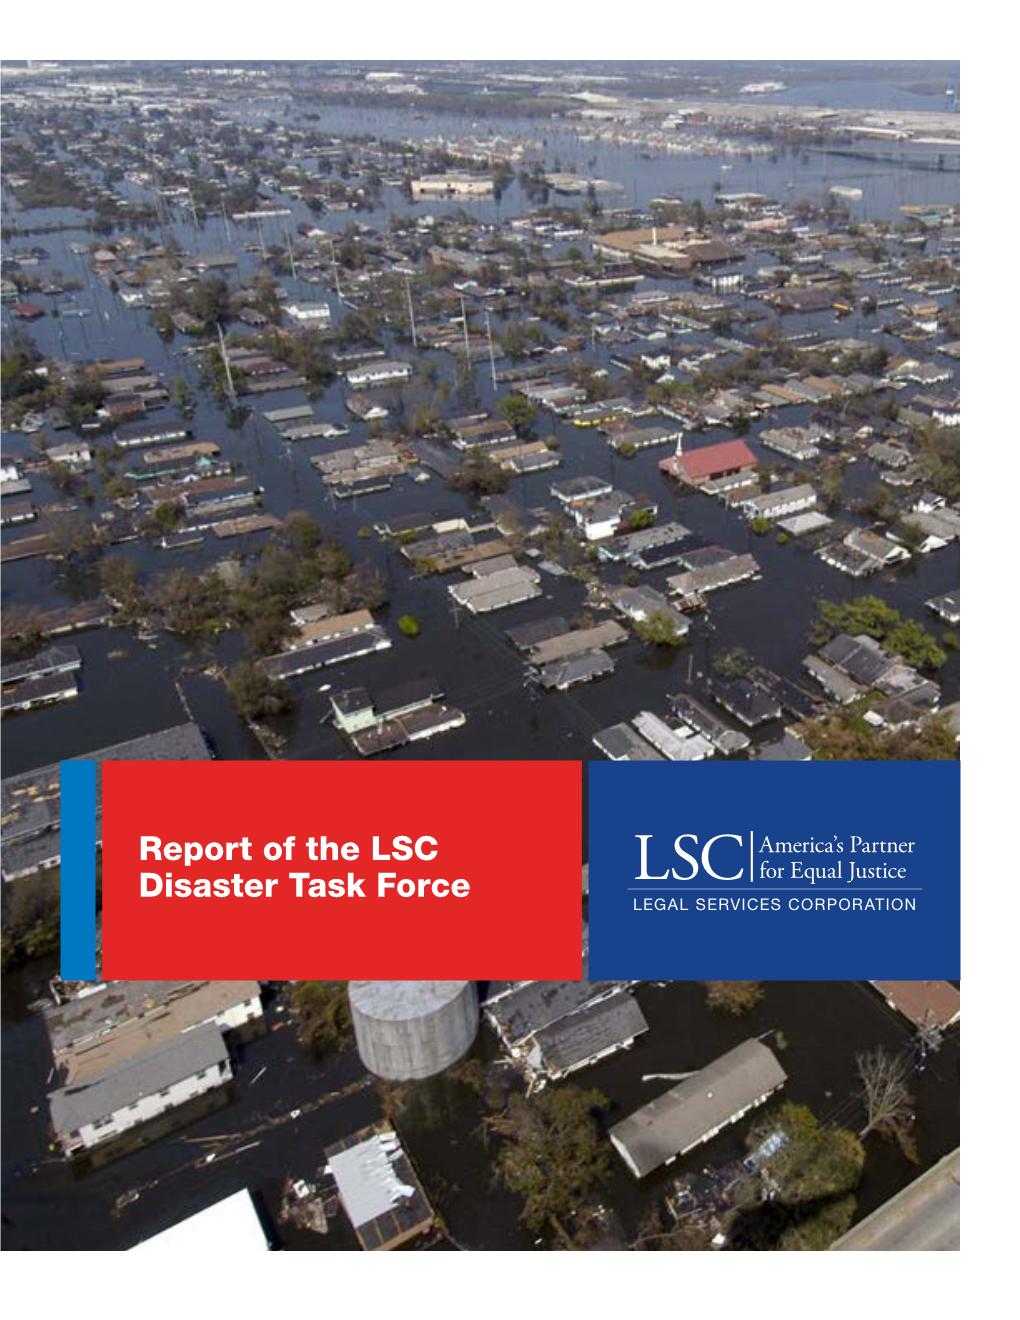 Report of the LSC Disaster Task Force